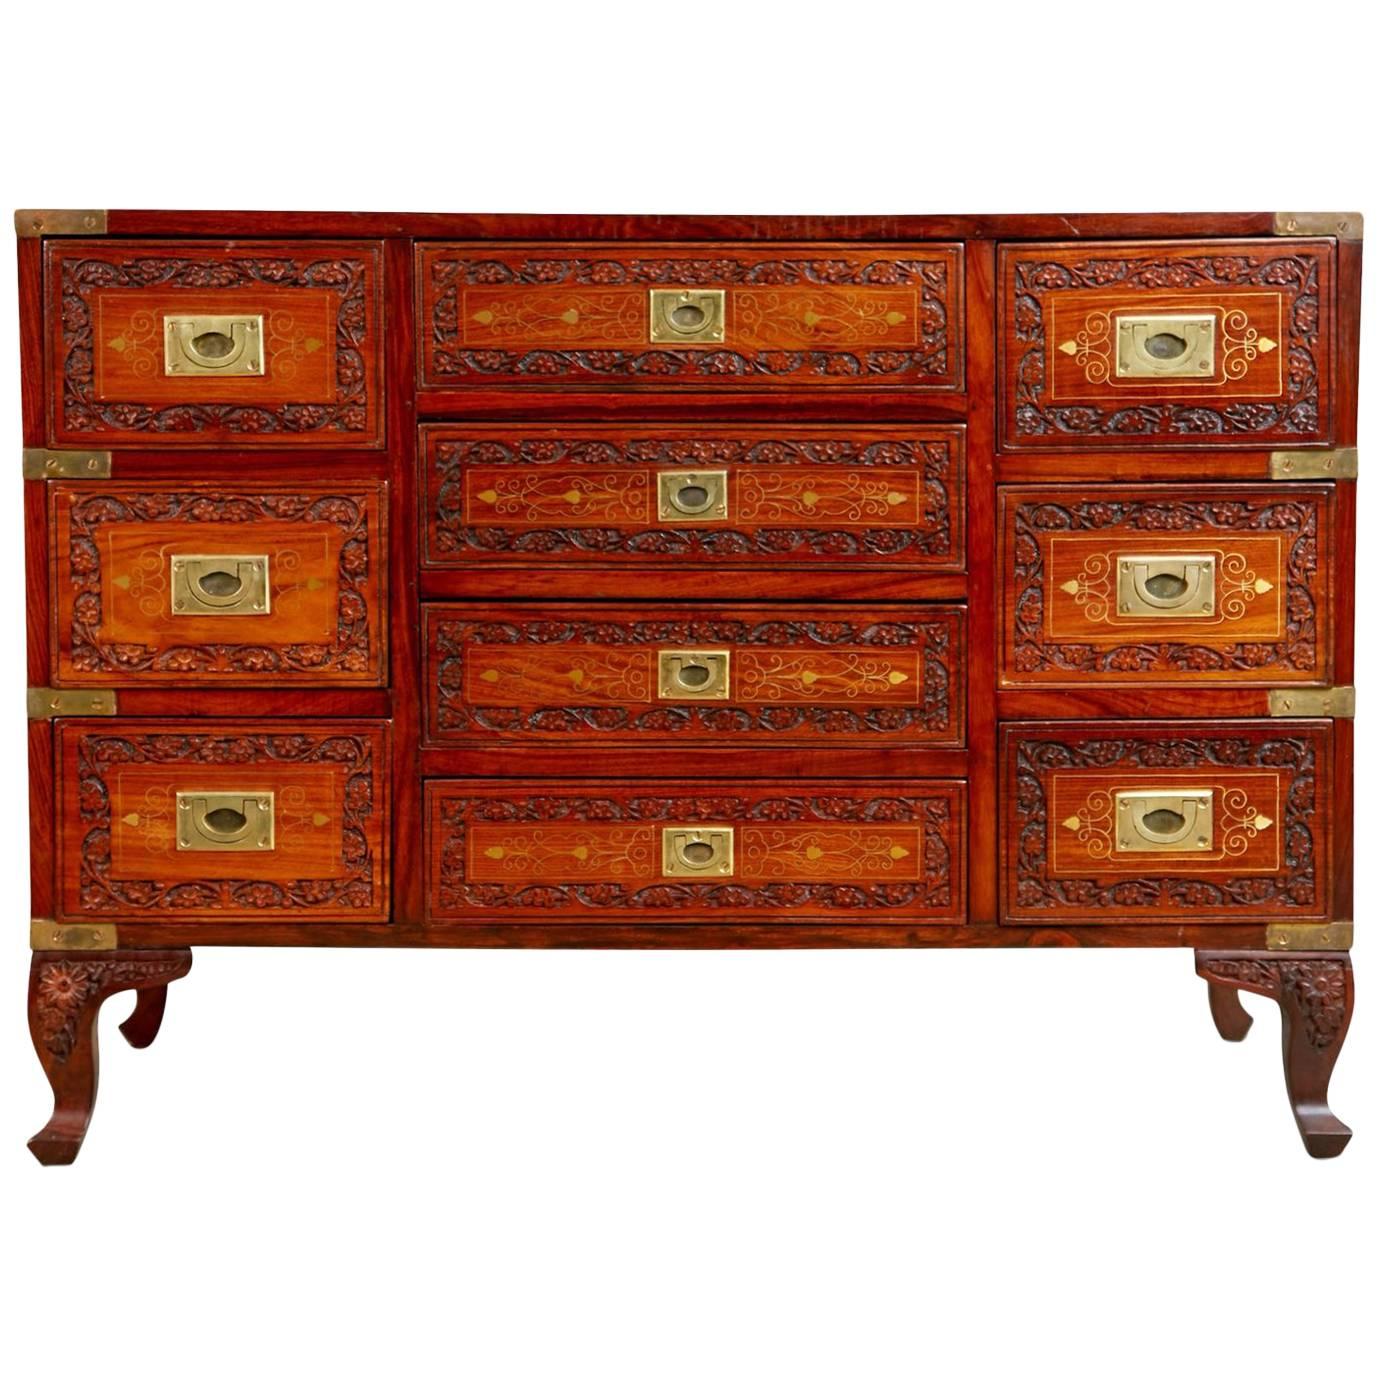 Carved Walnut and Brass Inlay Campaign Chest Dresser